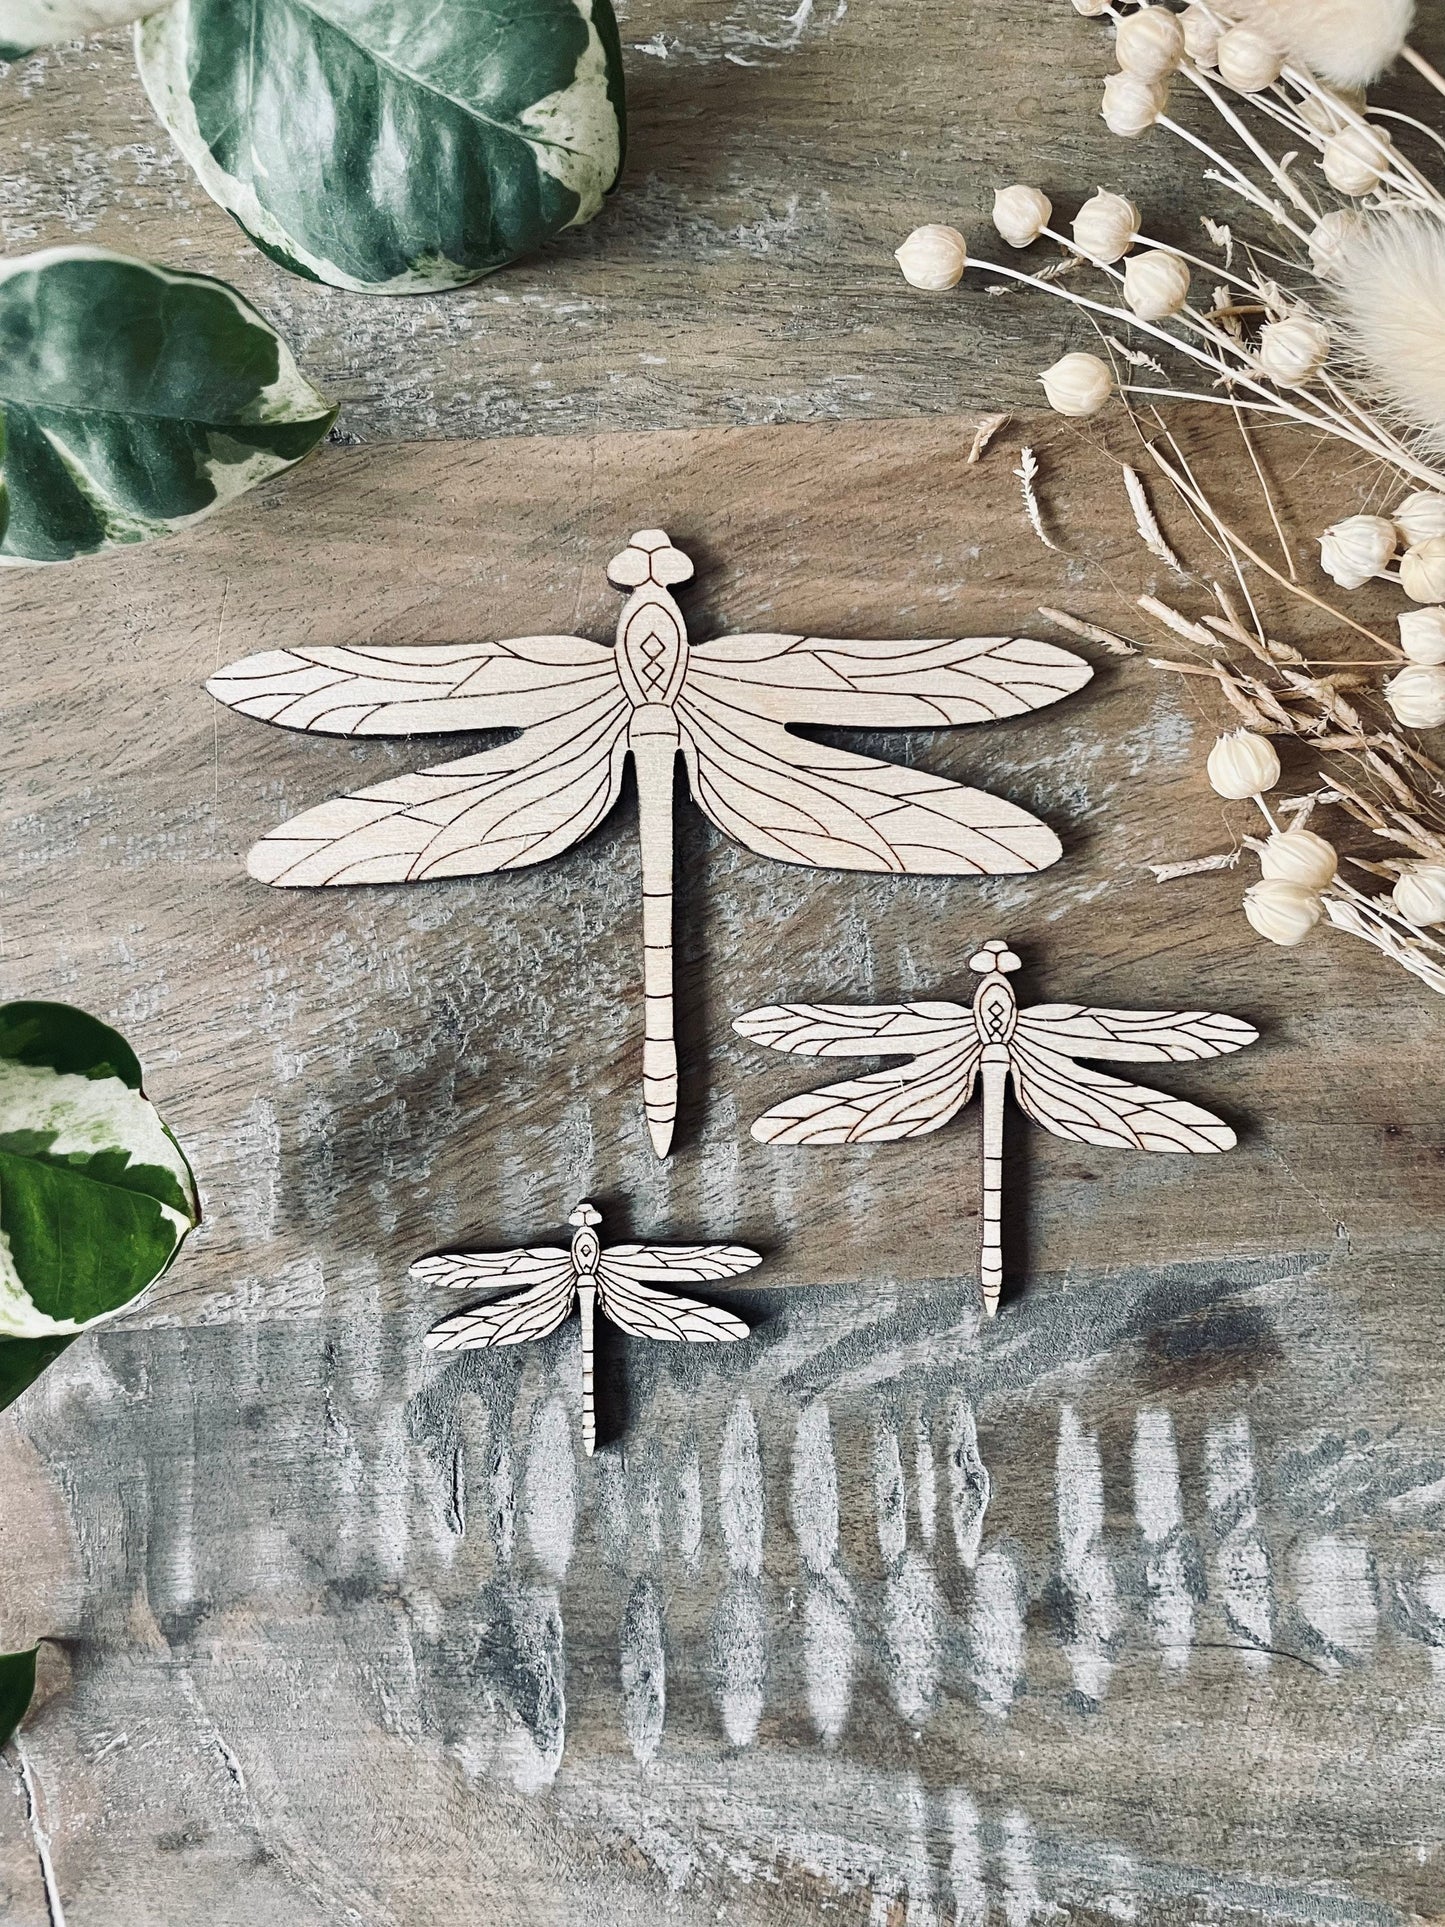 10x Handmade Dragonfly / Wood Insect from 40mm Wide | 3mm Thick Laser Cut Plywood Blanks | Craft Shapes